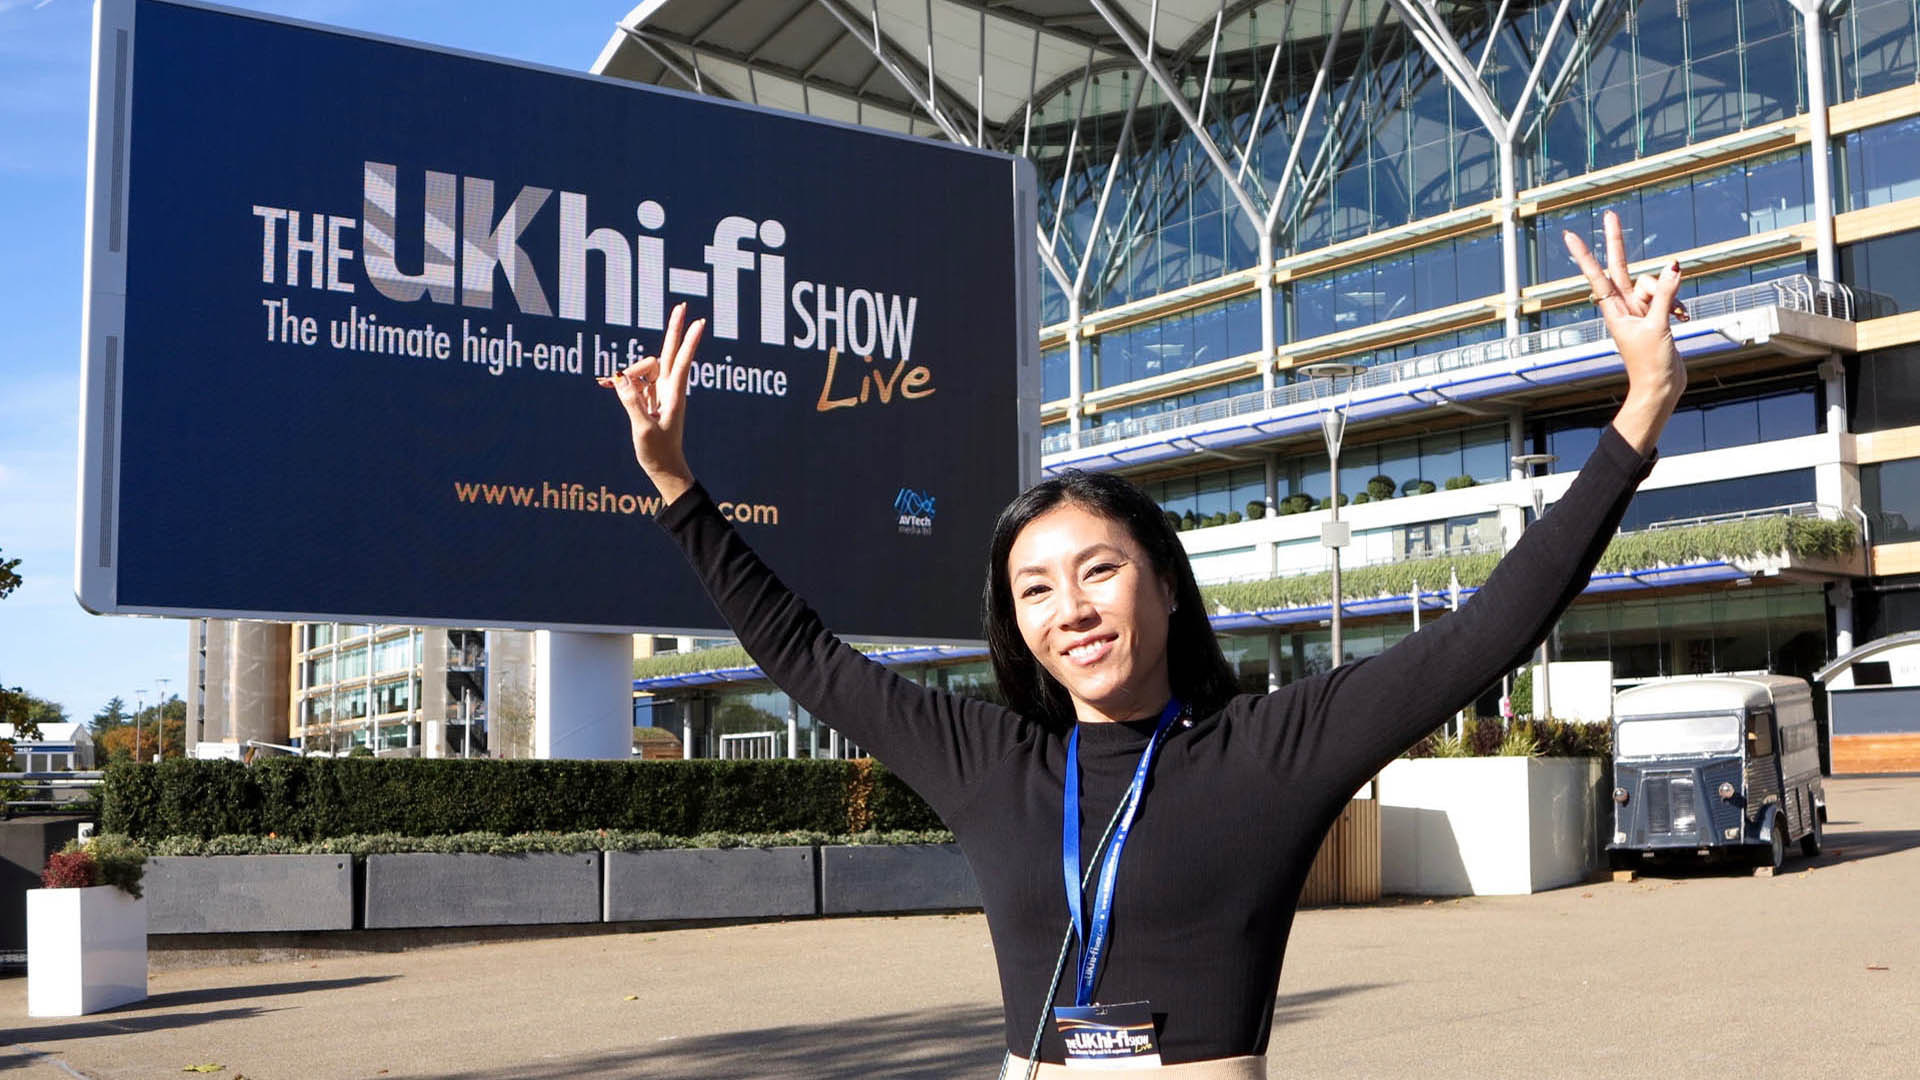 In 2019 the "UK Hi-Fi Show" for the first time took place at the "Grandstand" near the famous racecourse in Ascot. Izumi Saito from Luxman was especially happy about this.